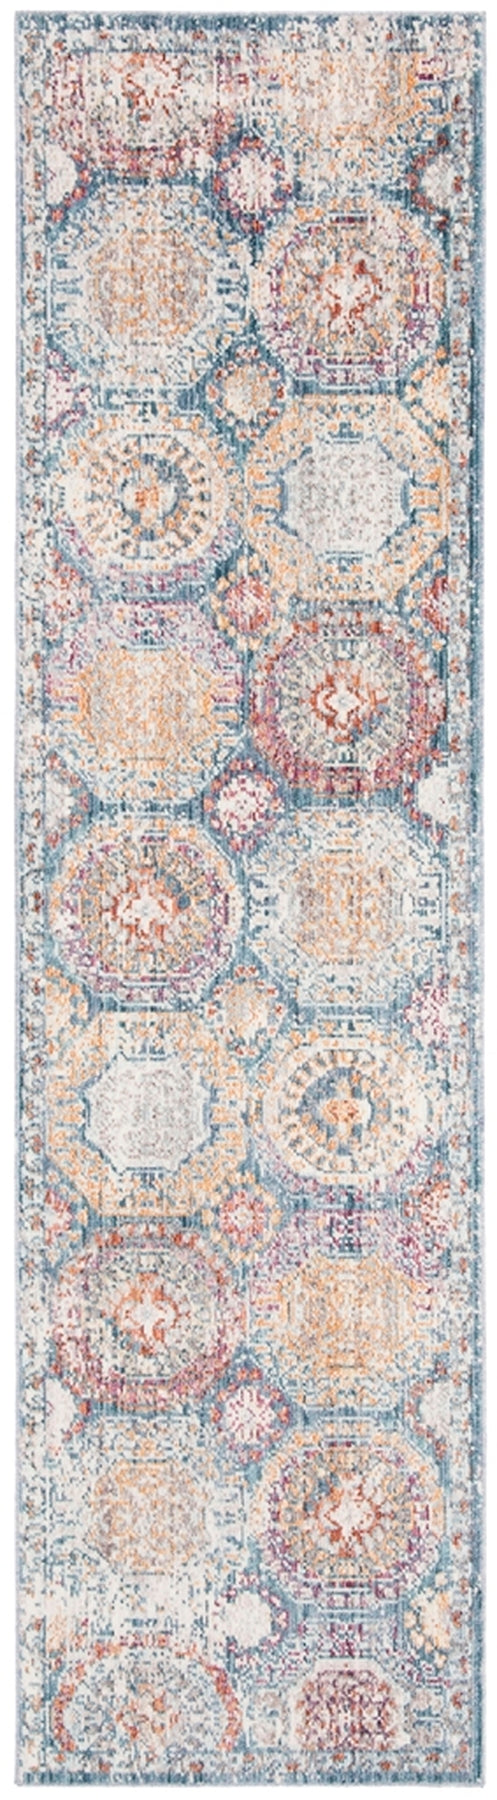 Safavieh Illusion Power Loomed Cotton Backing Rugs In Blue / Beige